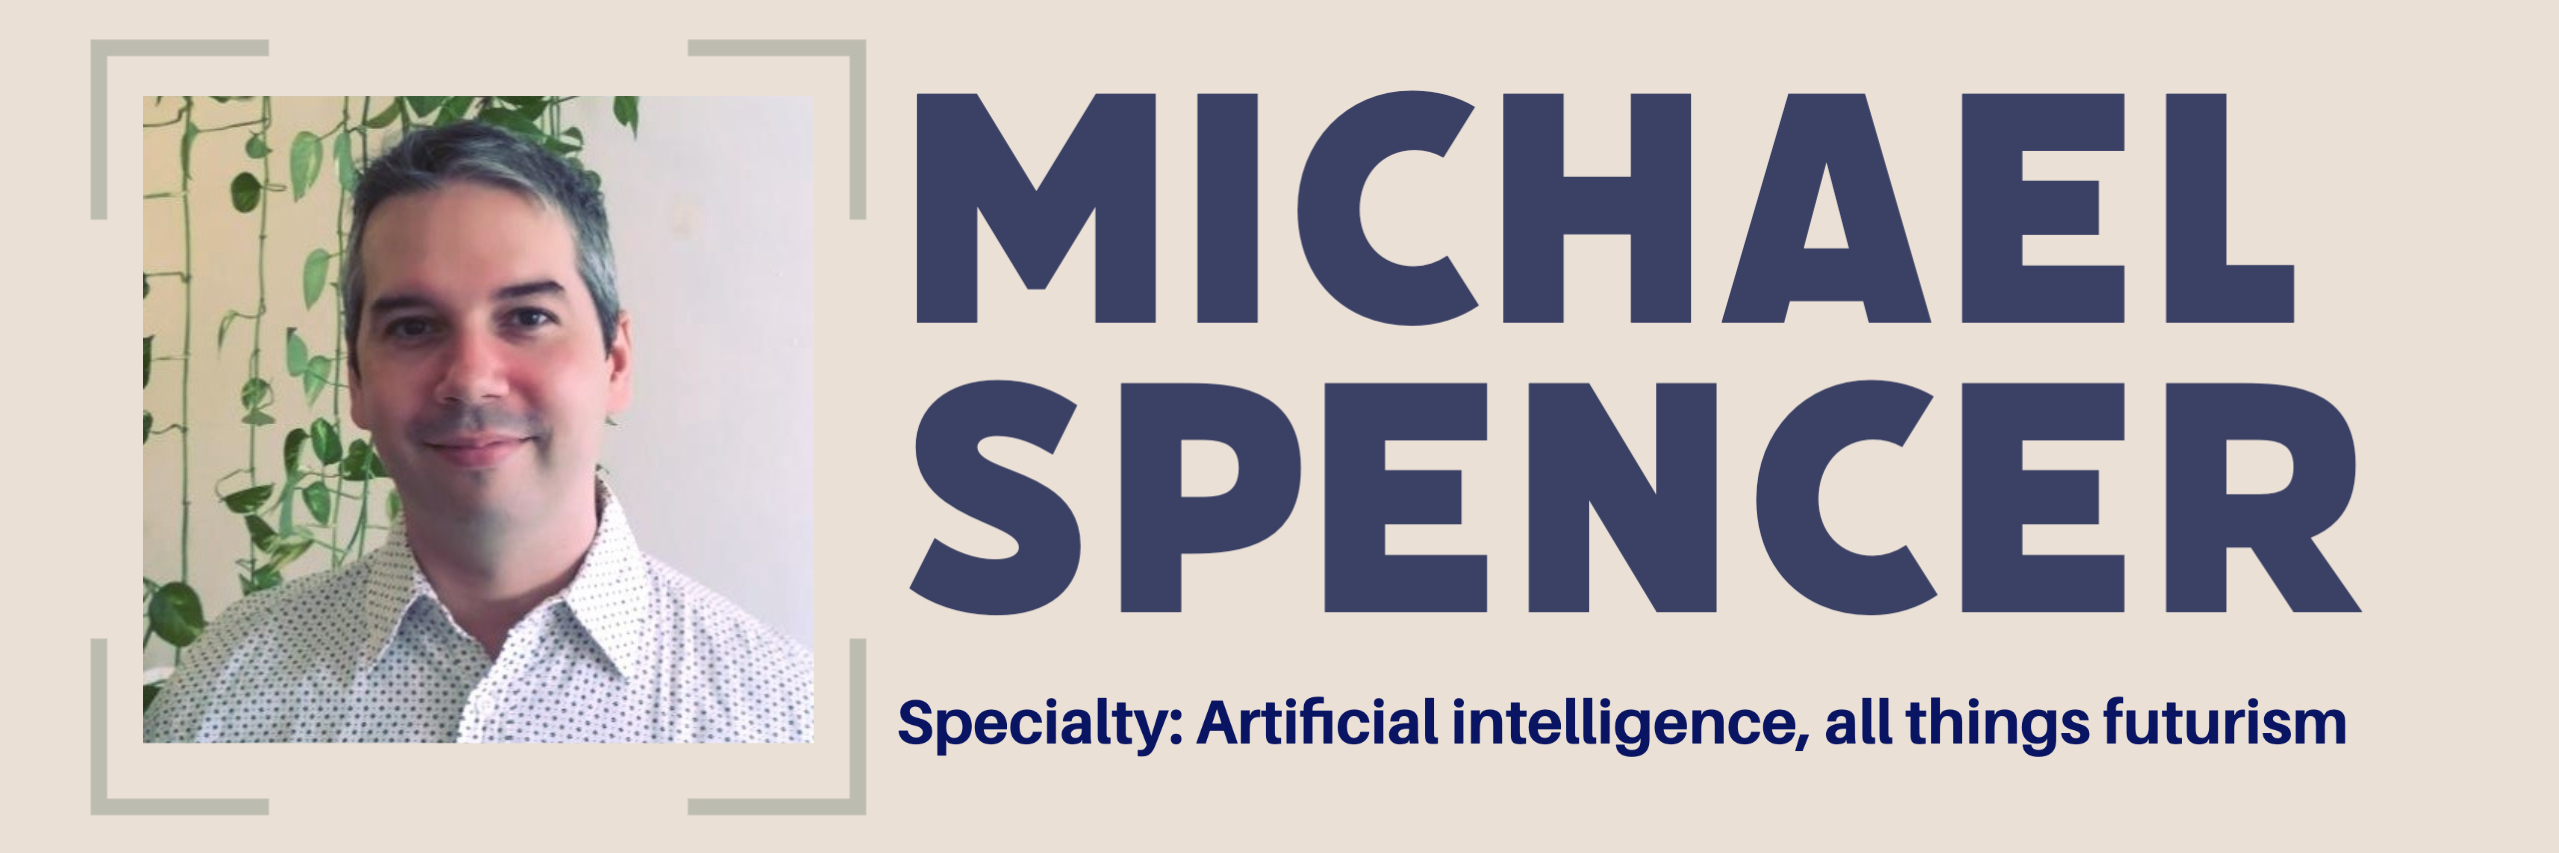 Artificial Intelligence expert Michael Spencer openly shares his insights to his feed